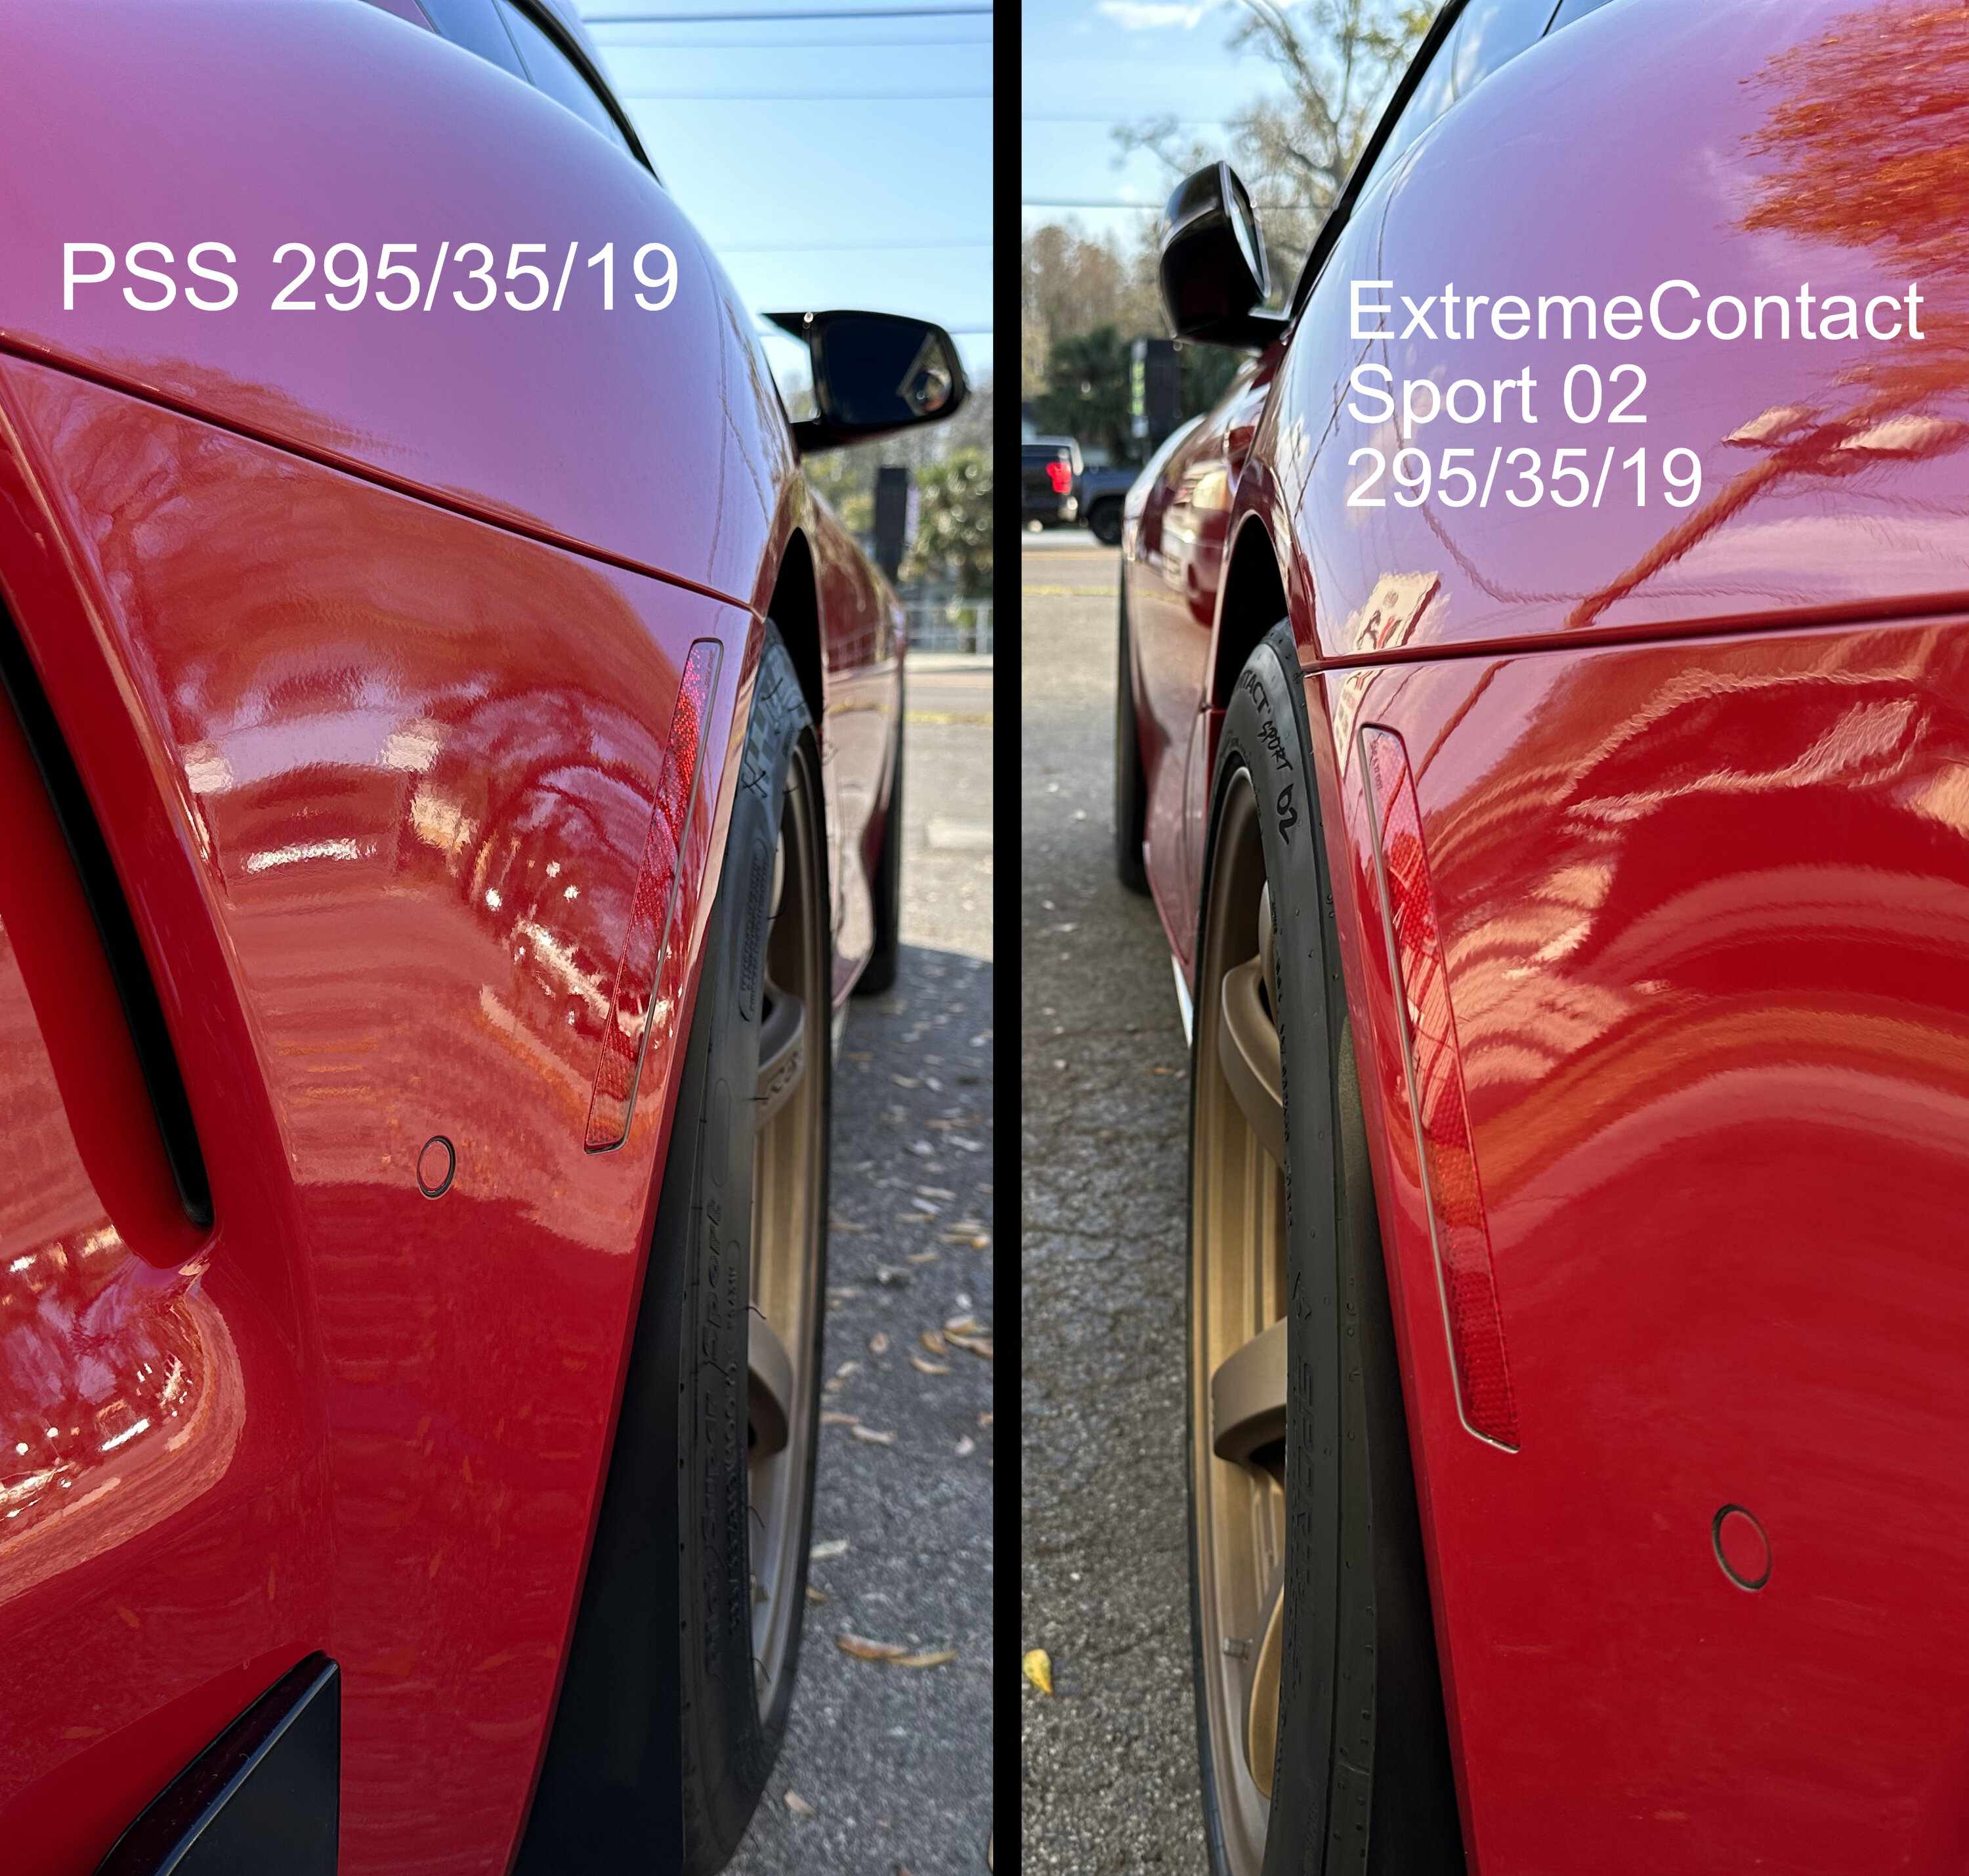 PSS vs ExtremeContact Sport 02 Rear Sidewall.jpg